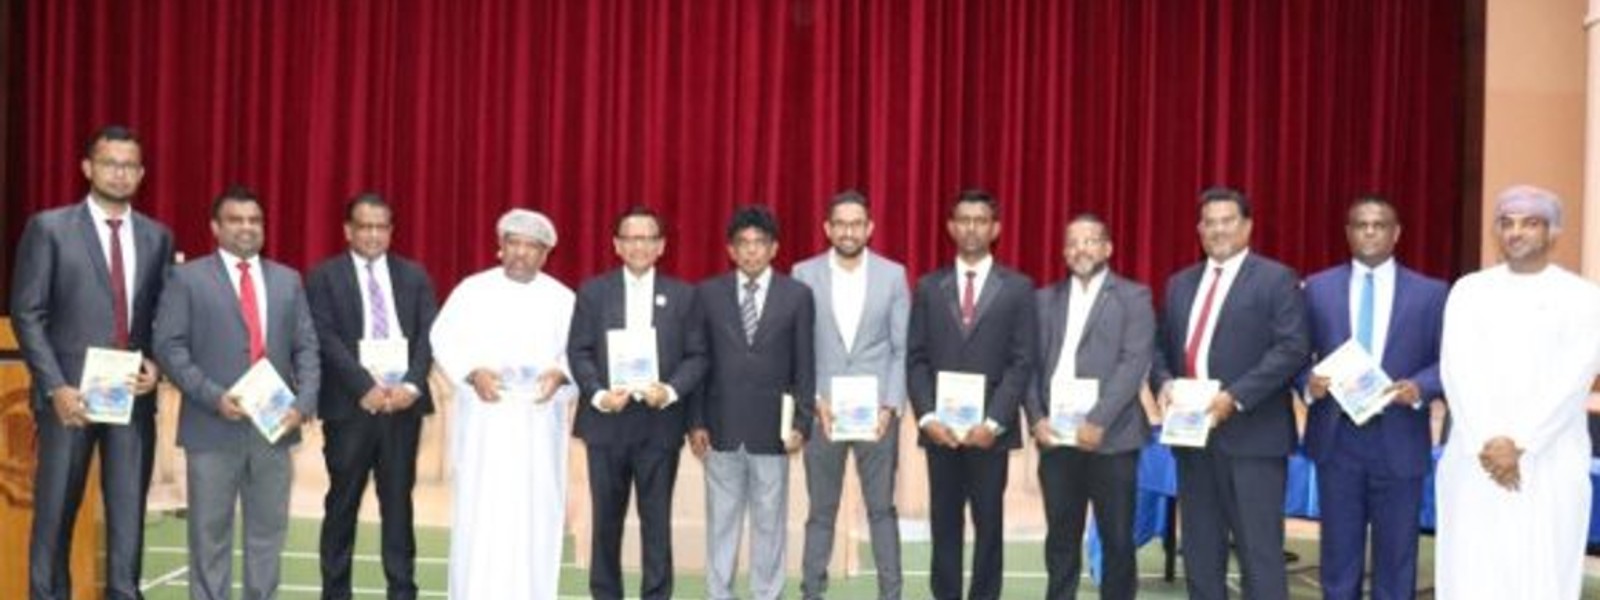 Book on “Sri Lanka – Oman Relations” launched